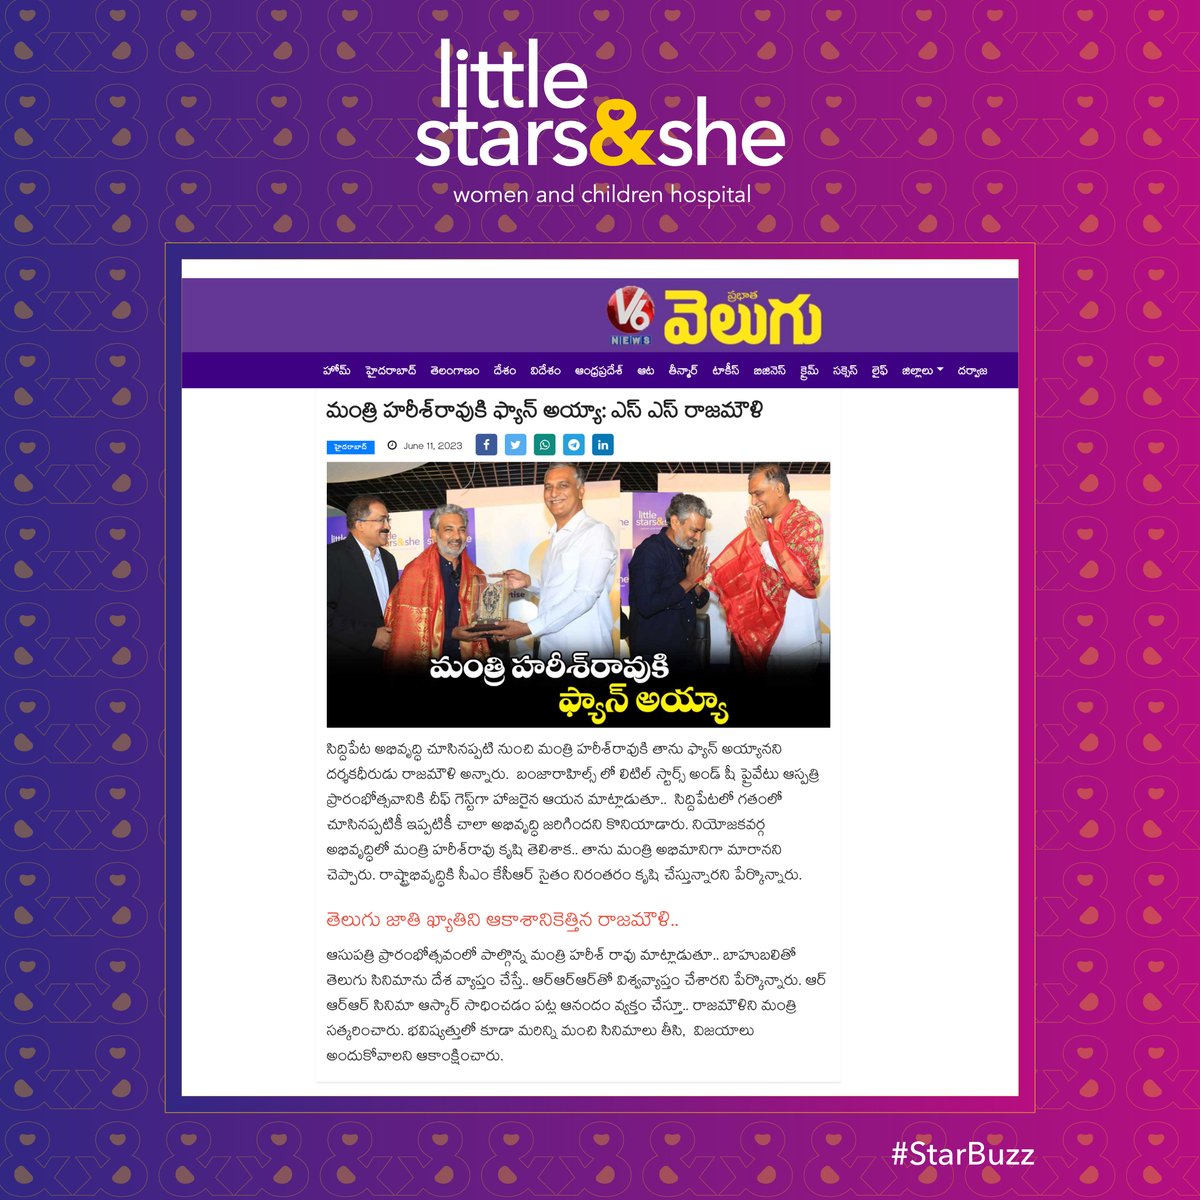 Our grand inauguration - is covered by Andhra Prabha

#Inauguration #News #PressArticle #AndhraPrabha #LittleStarsAndShe #ChildrensCare #WomensCare #Healthcare #Gynaecology #Pediatric #ChildCare #Parenting